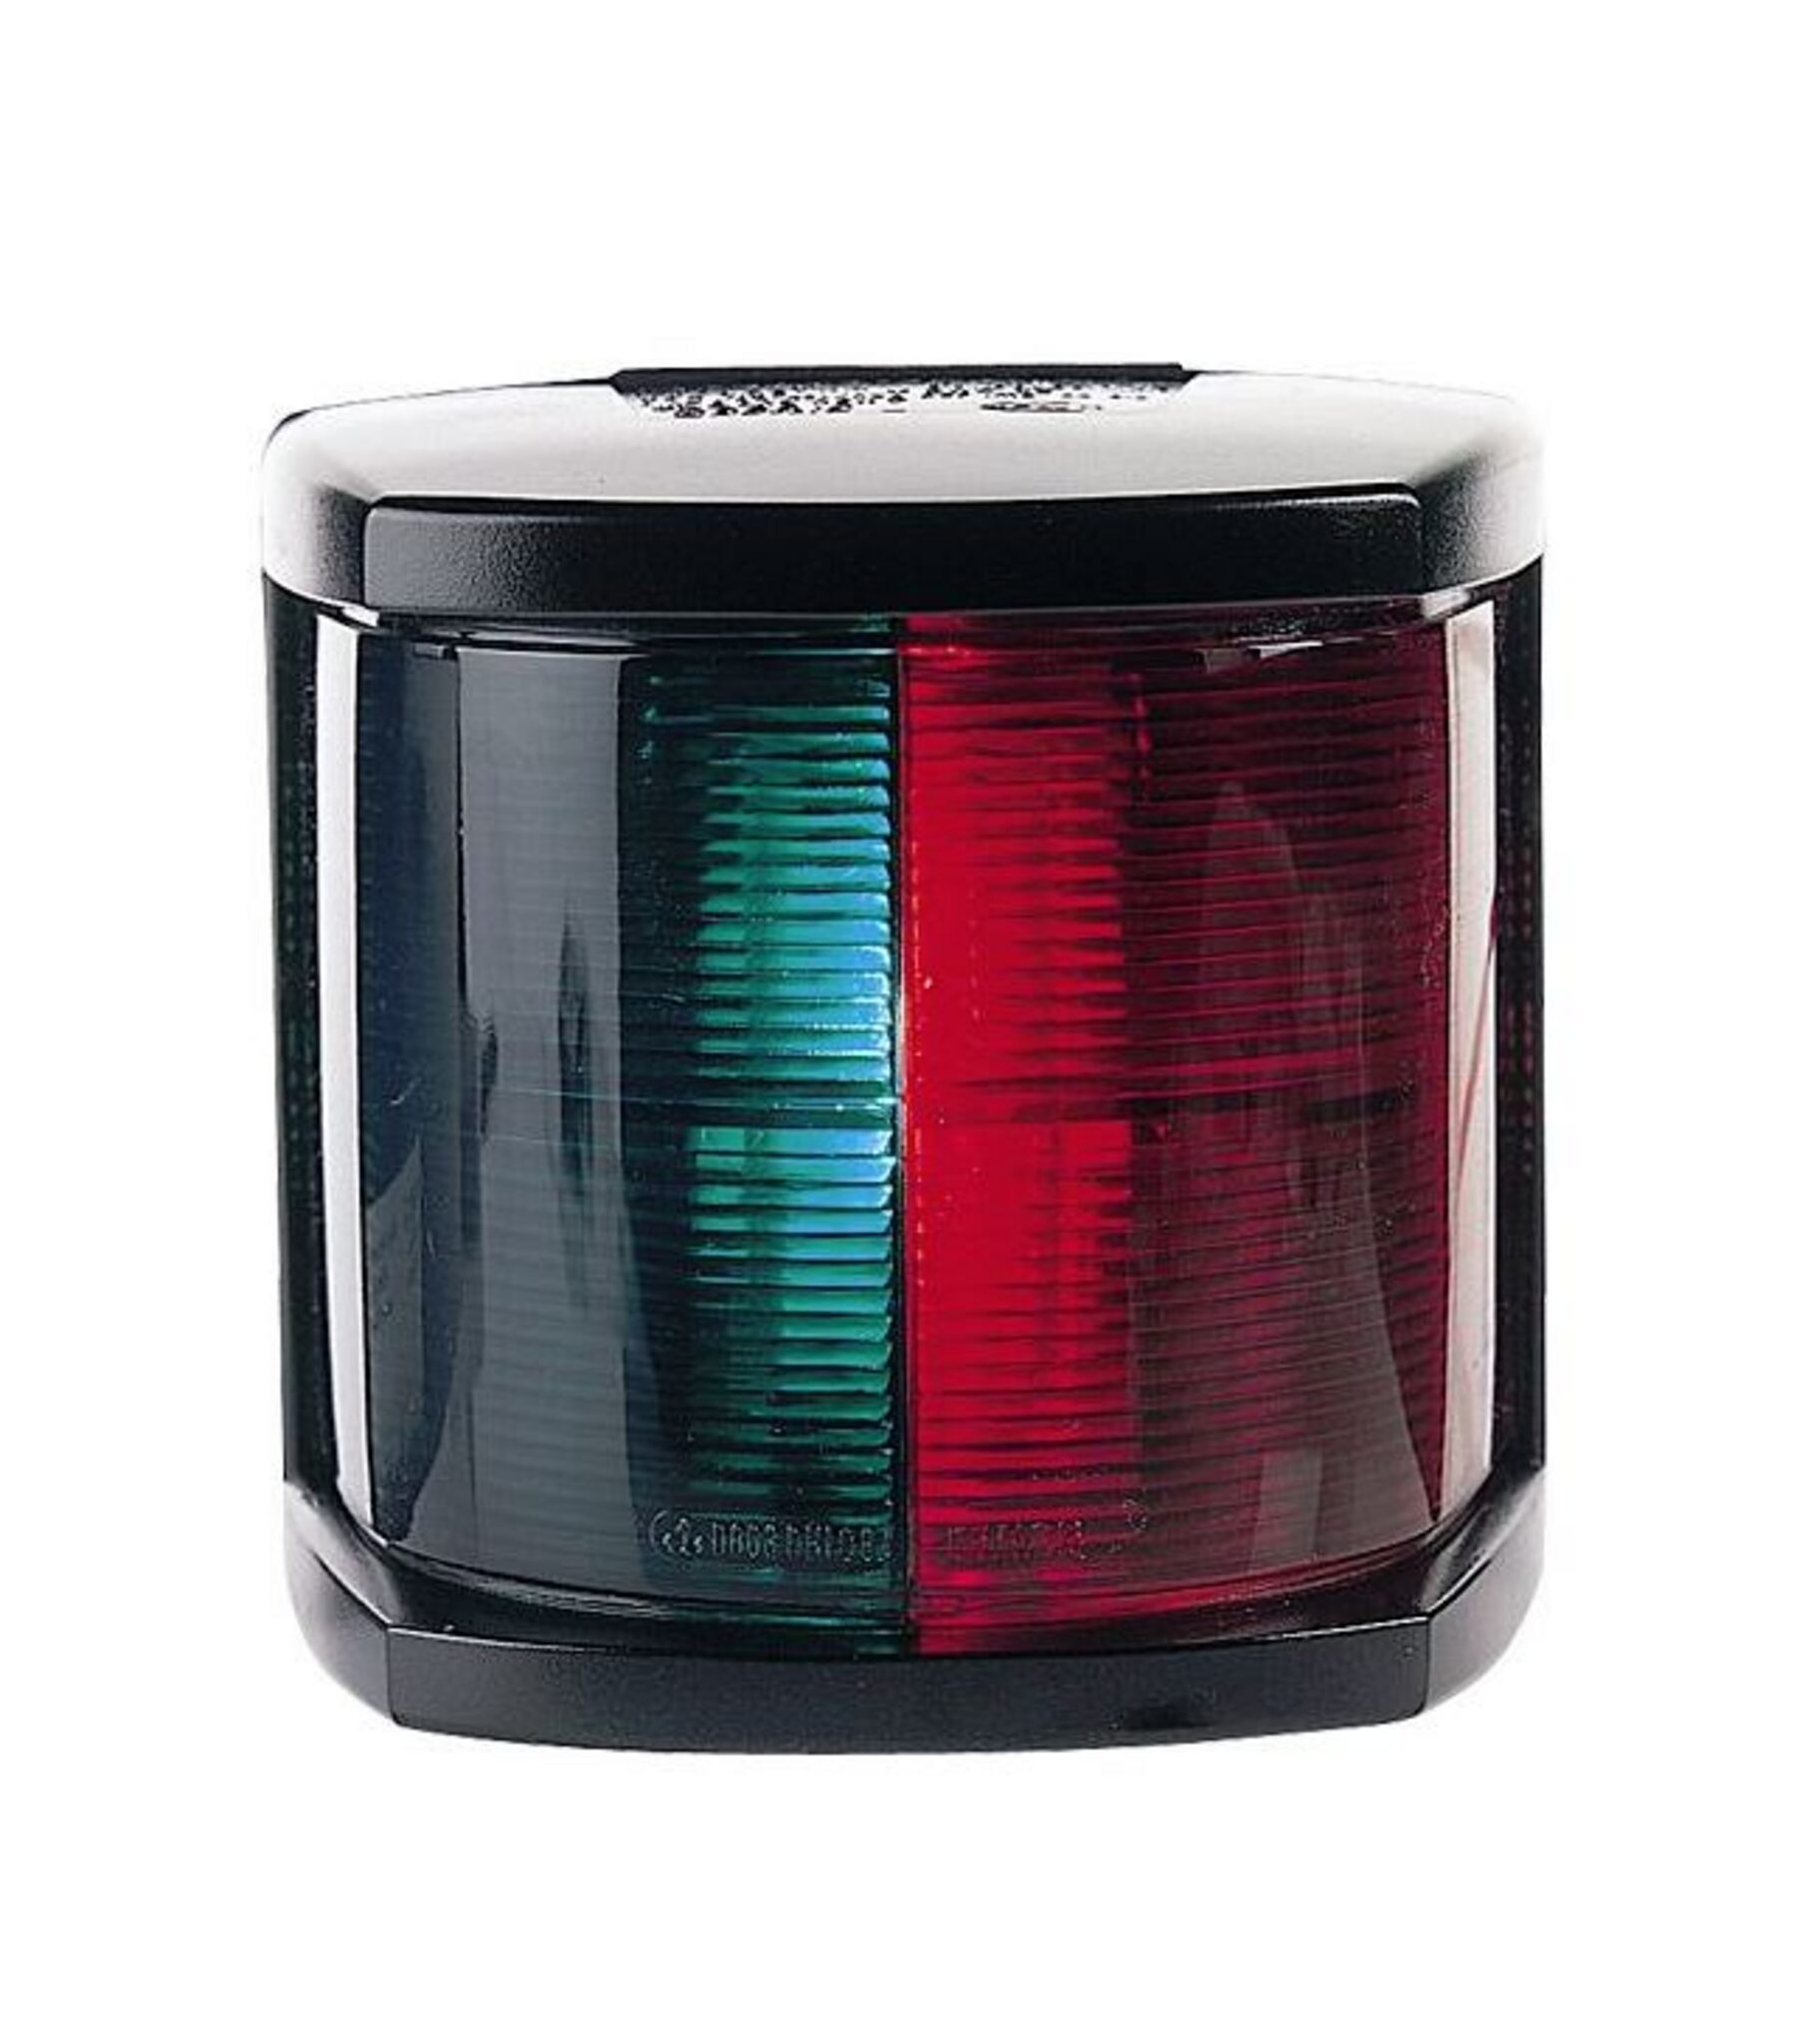 Hella Marine two color lantern 2984 with black housing